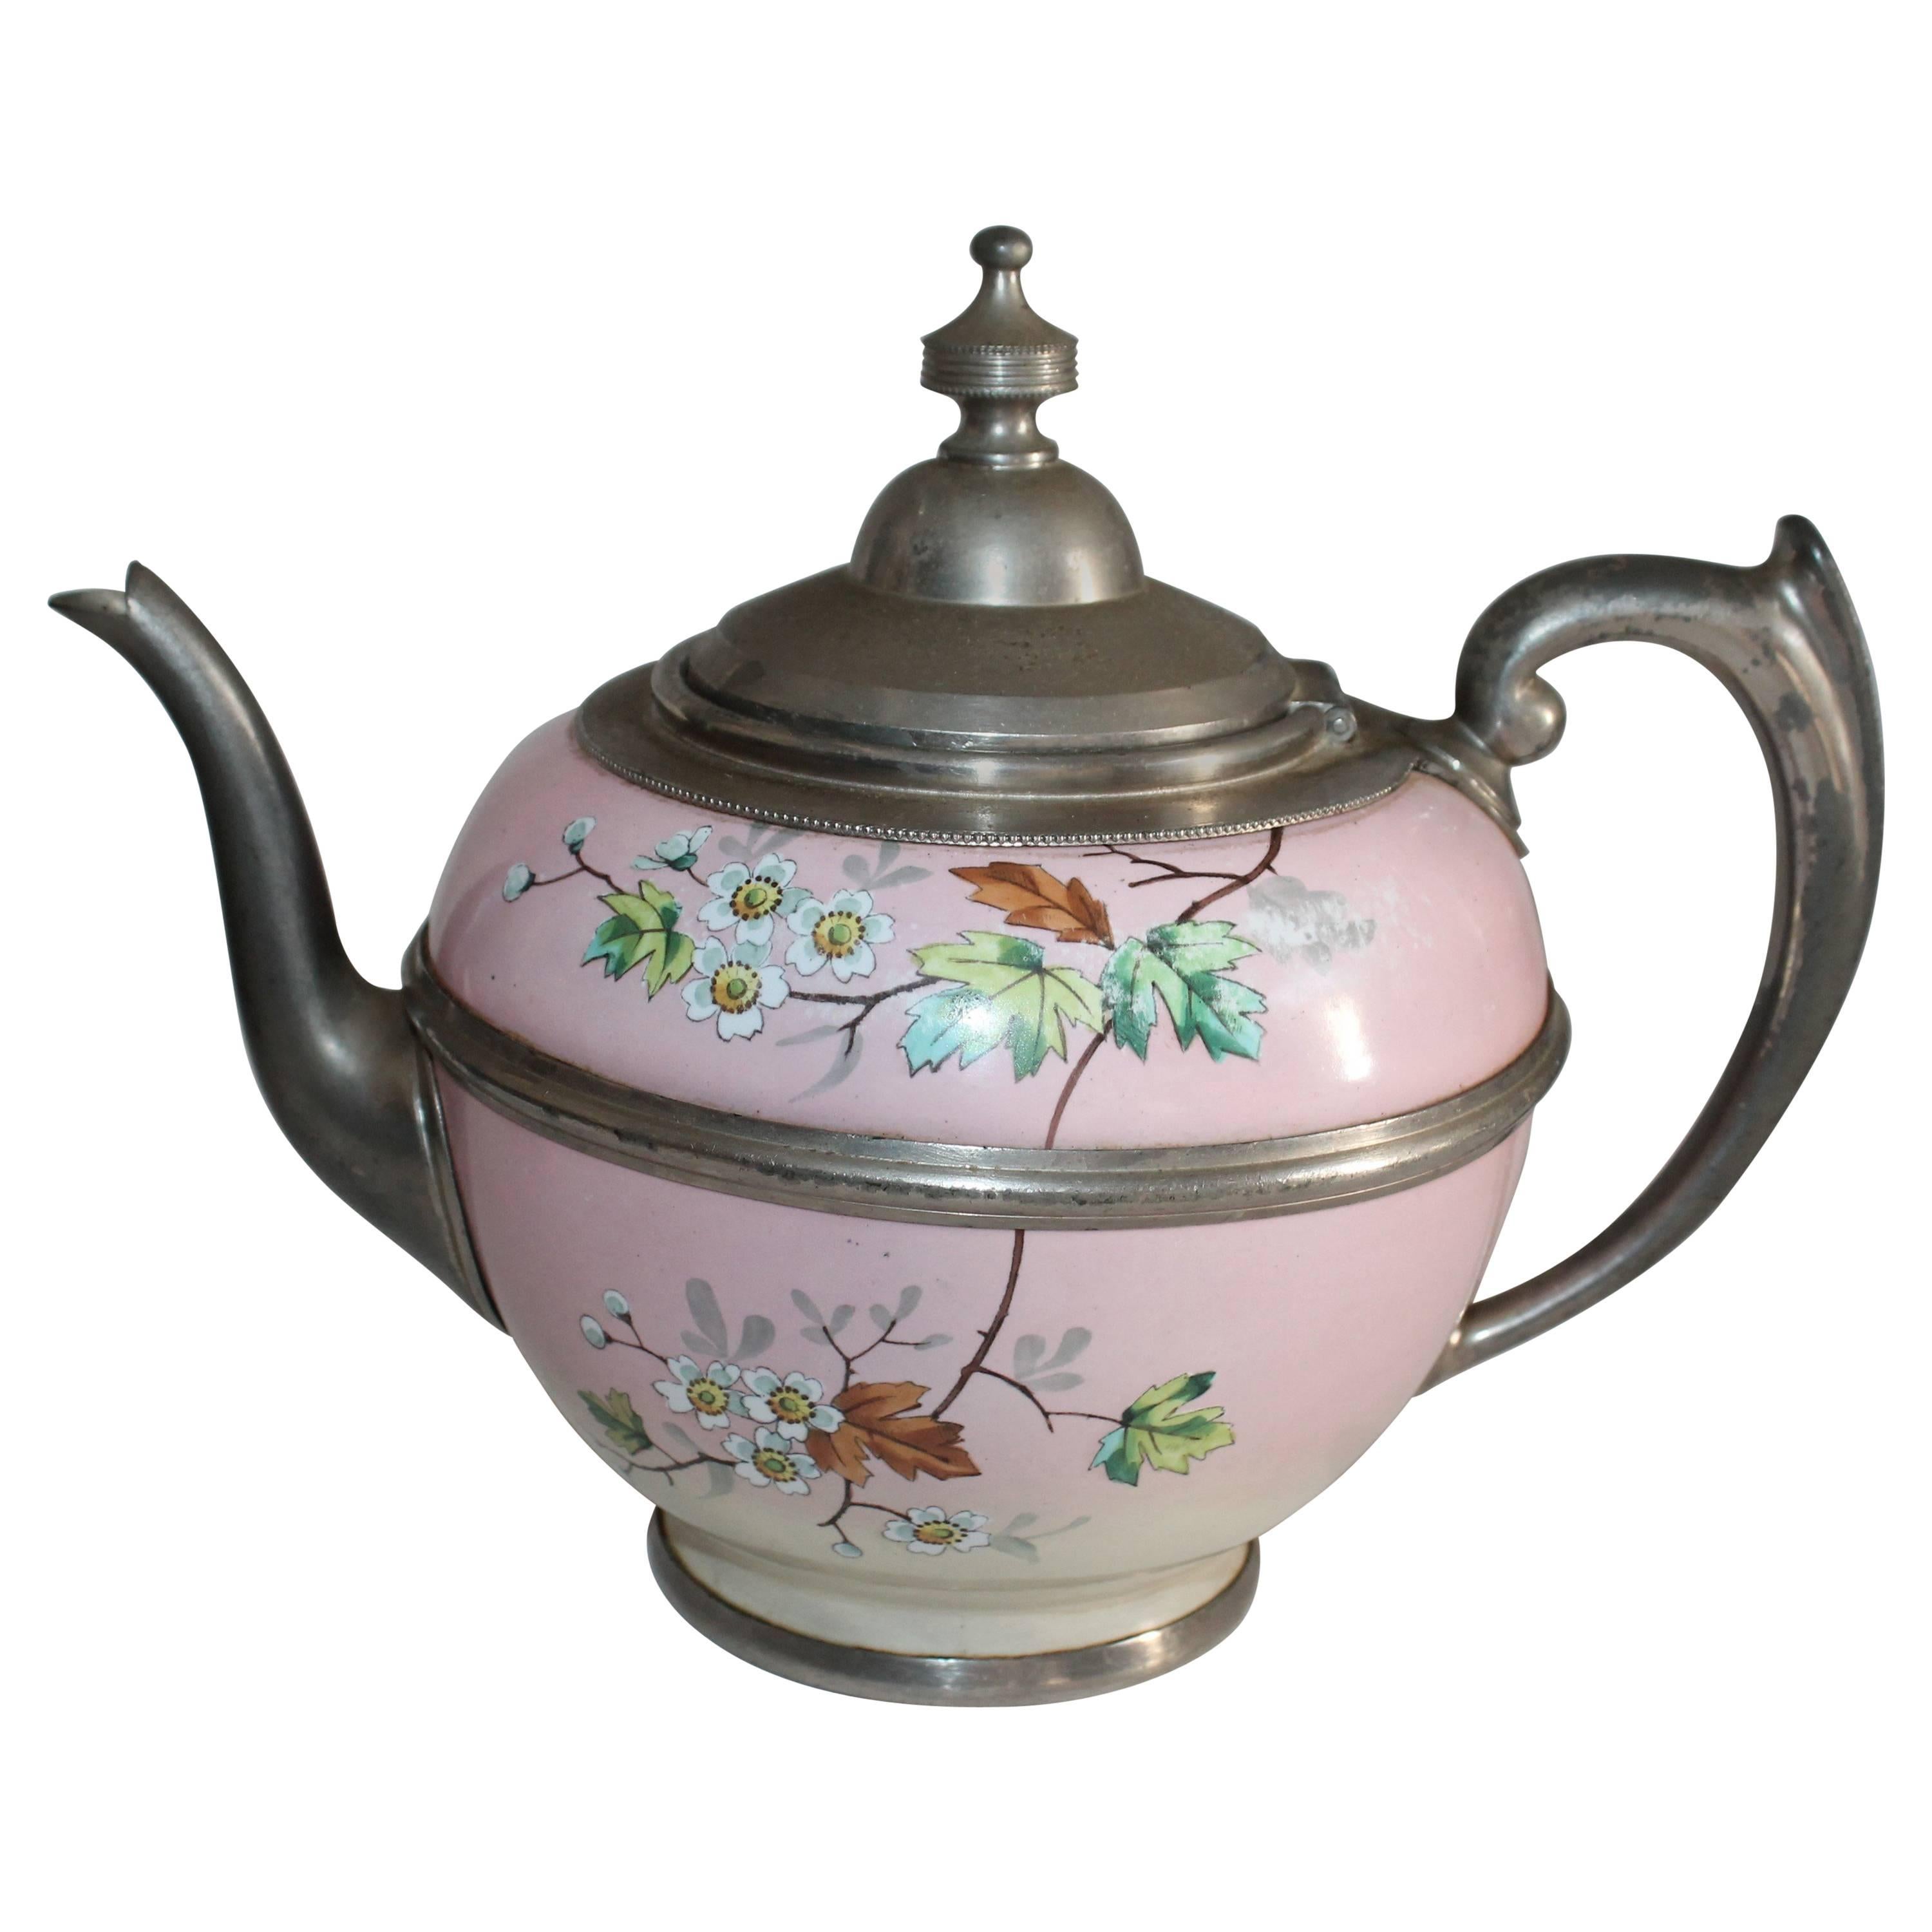 Rare 19th Century Painted Enamel and Pewter Tea Pot For Sale